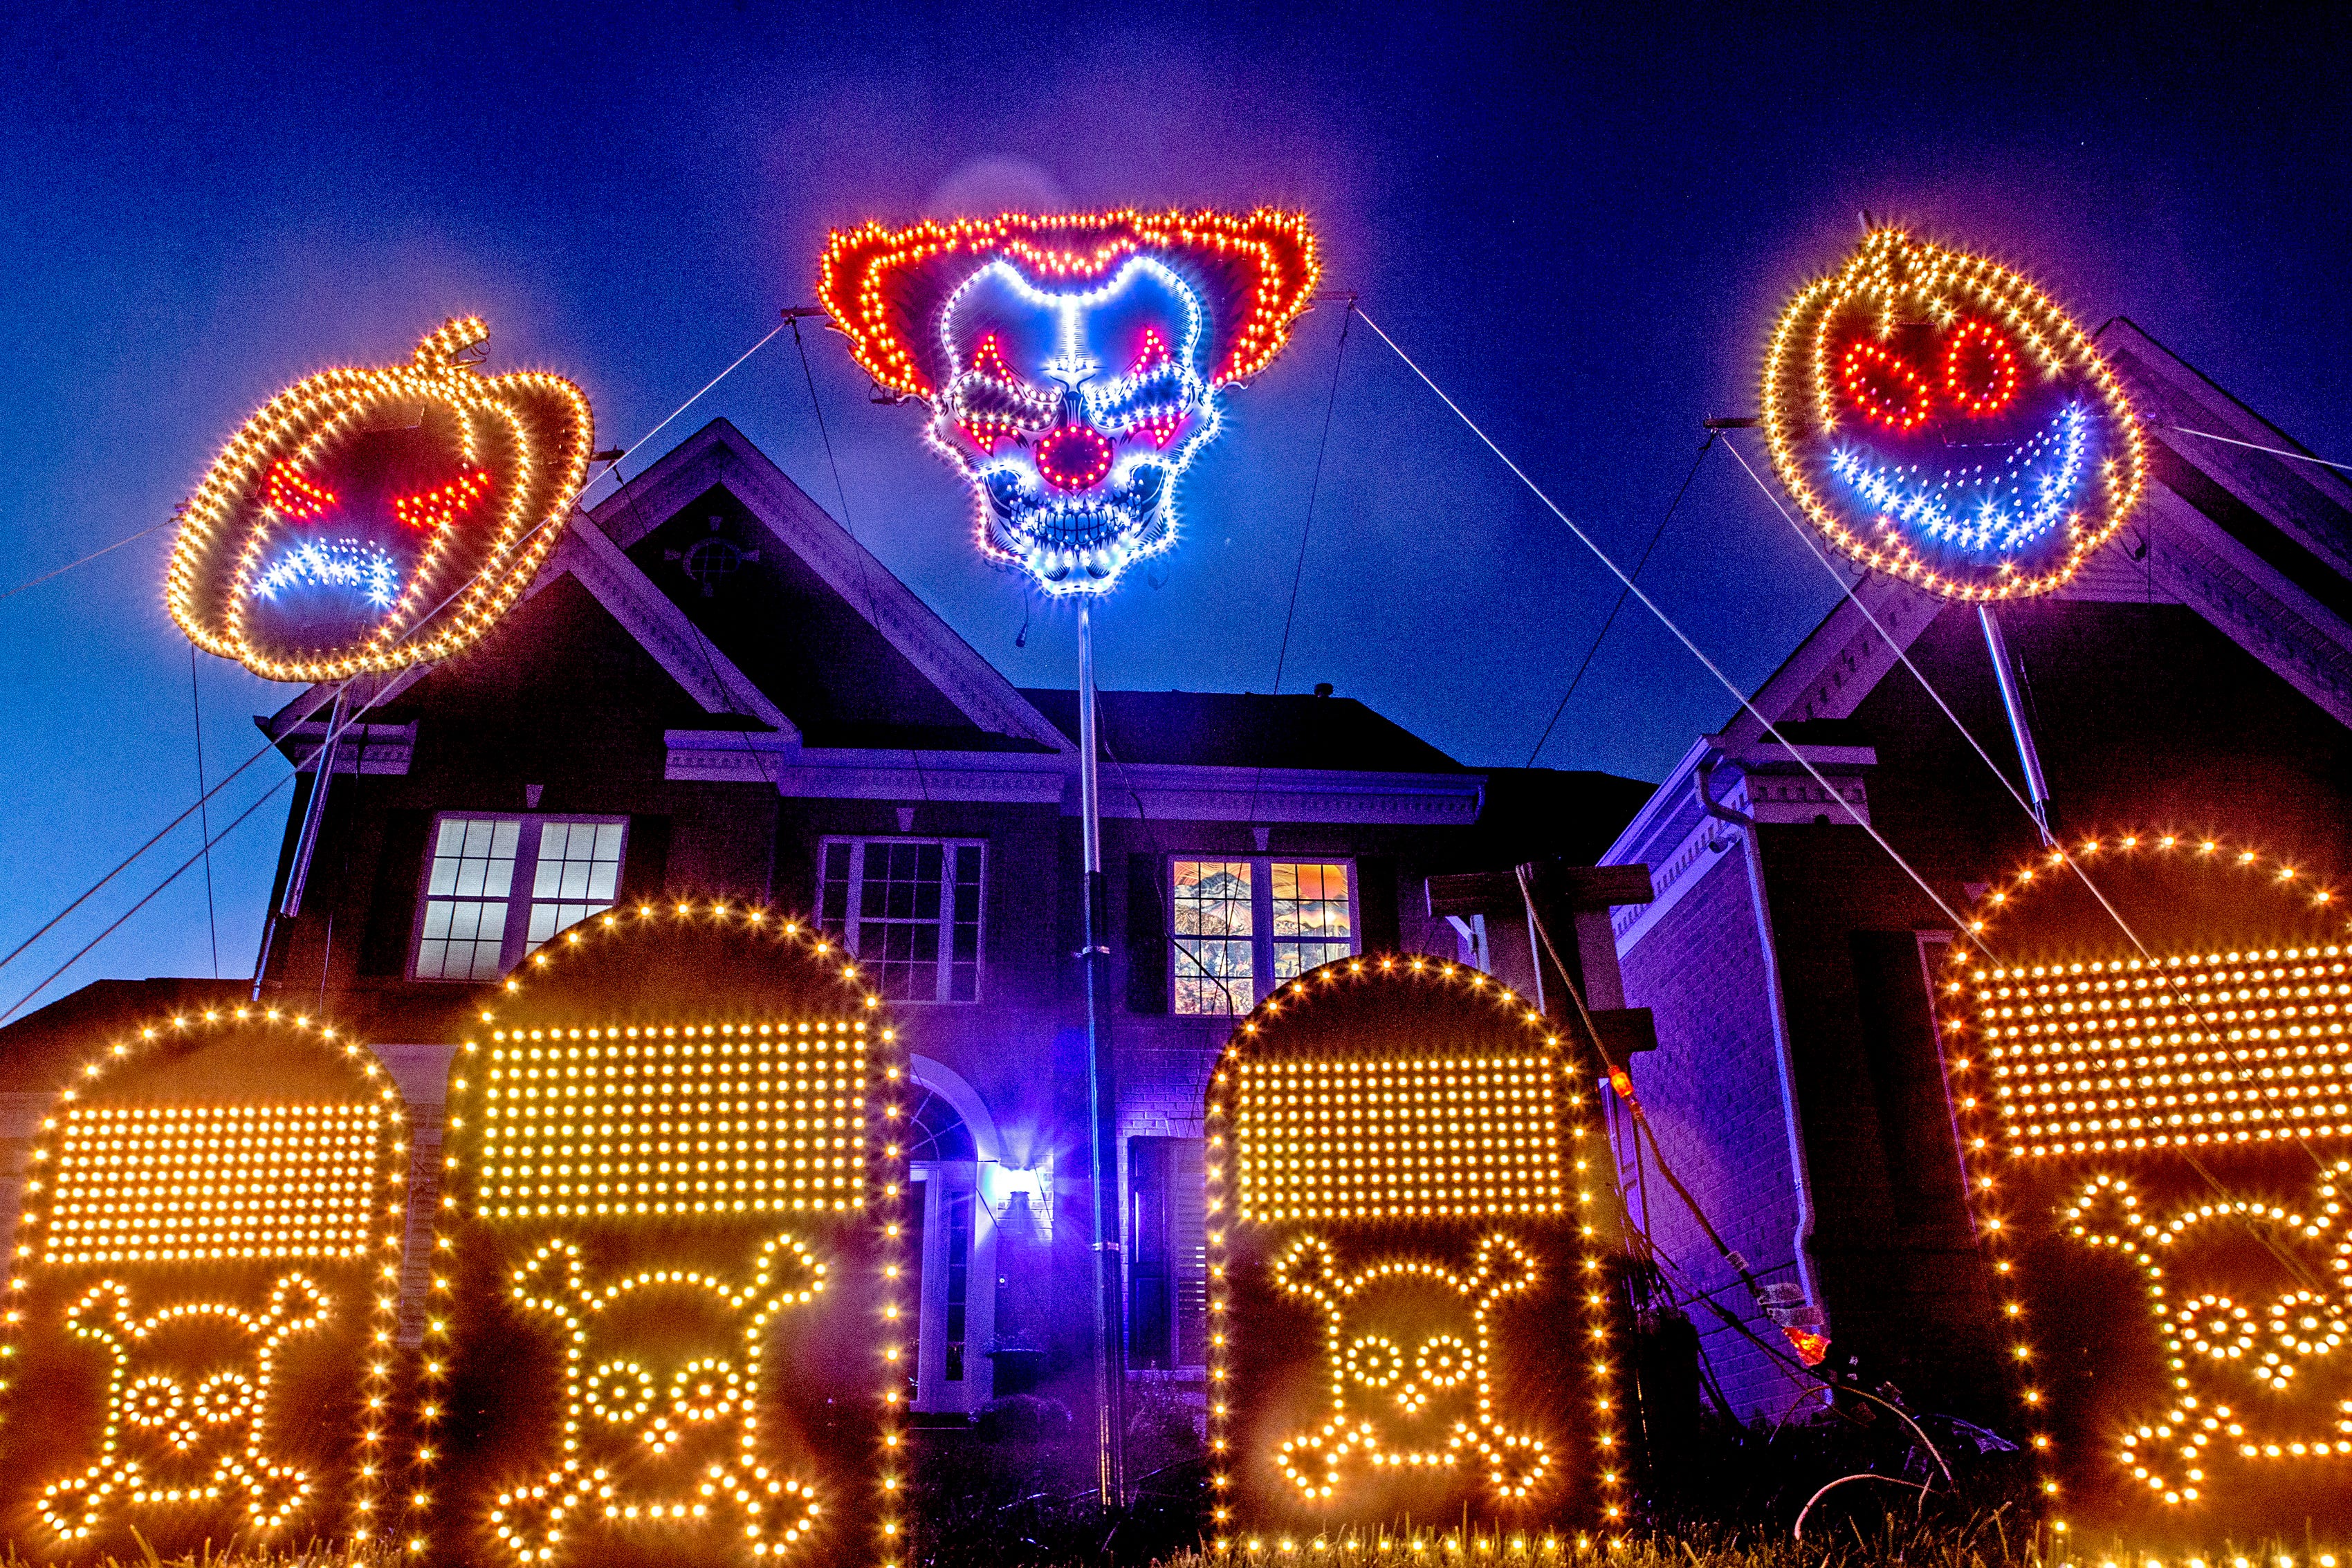 Delaware house lights up for Halloween with holiday display